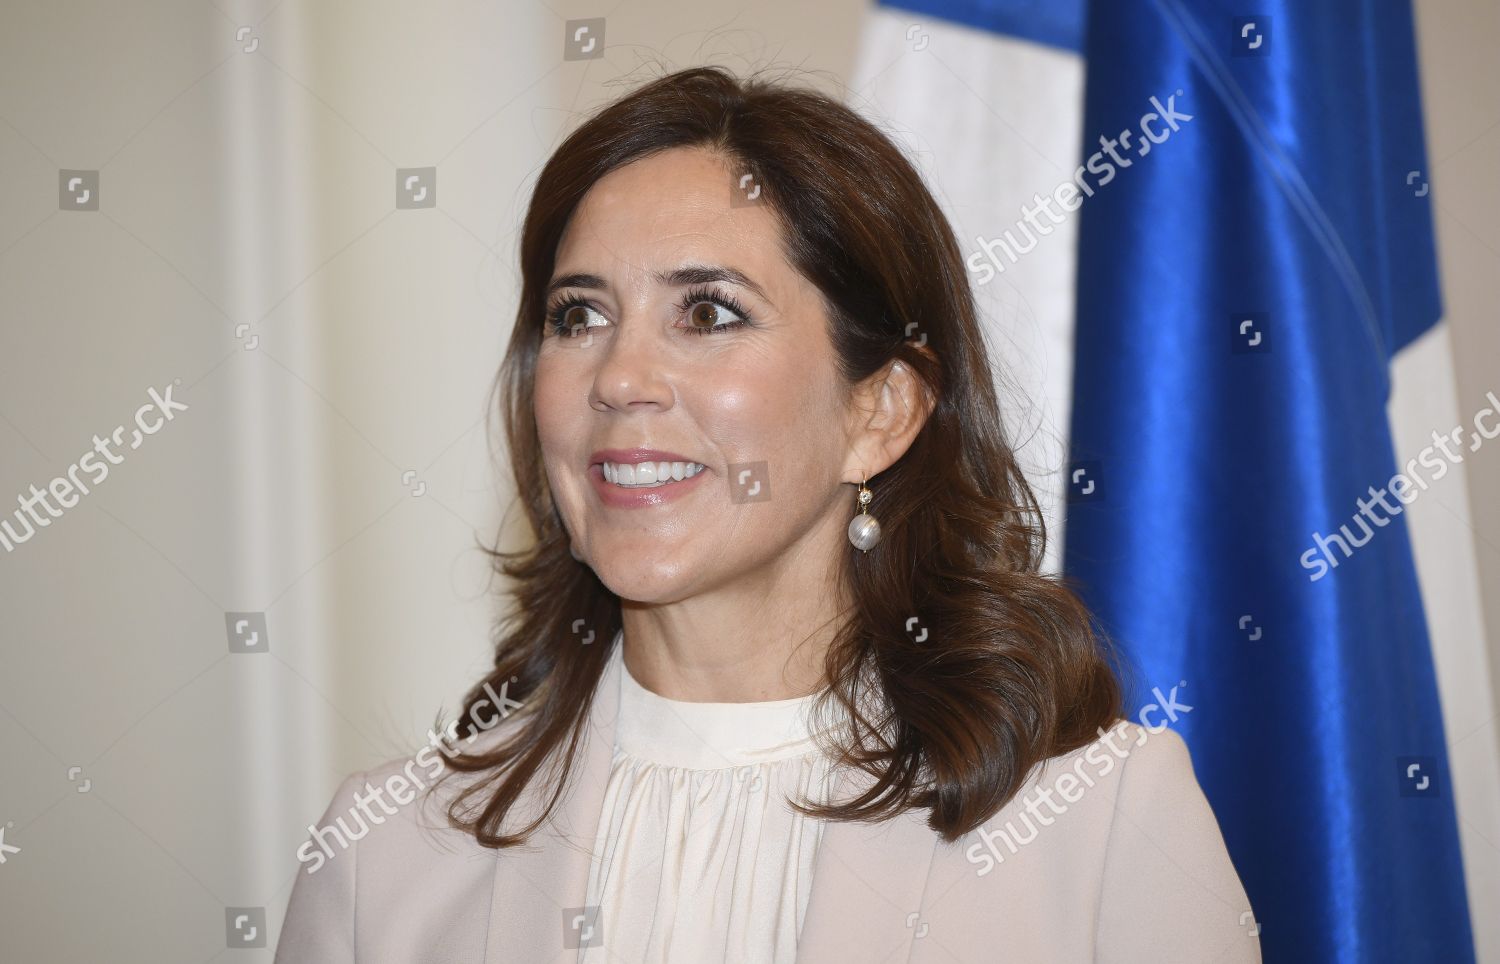 crown-princess-mary-visit-to-finland-shutterstock-editorial-9881095c.jpg